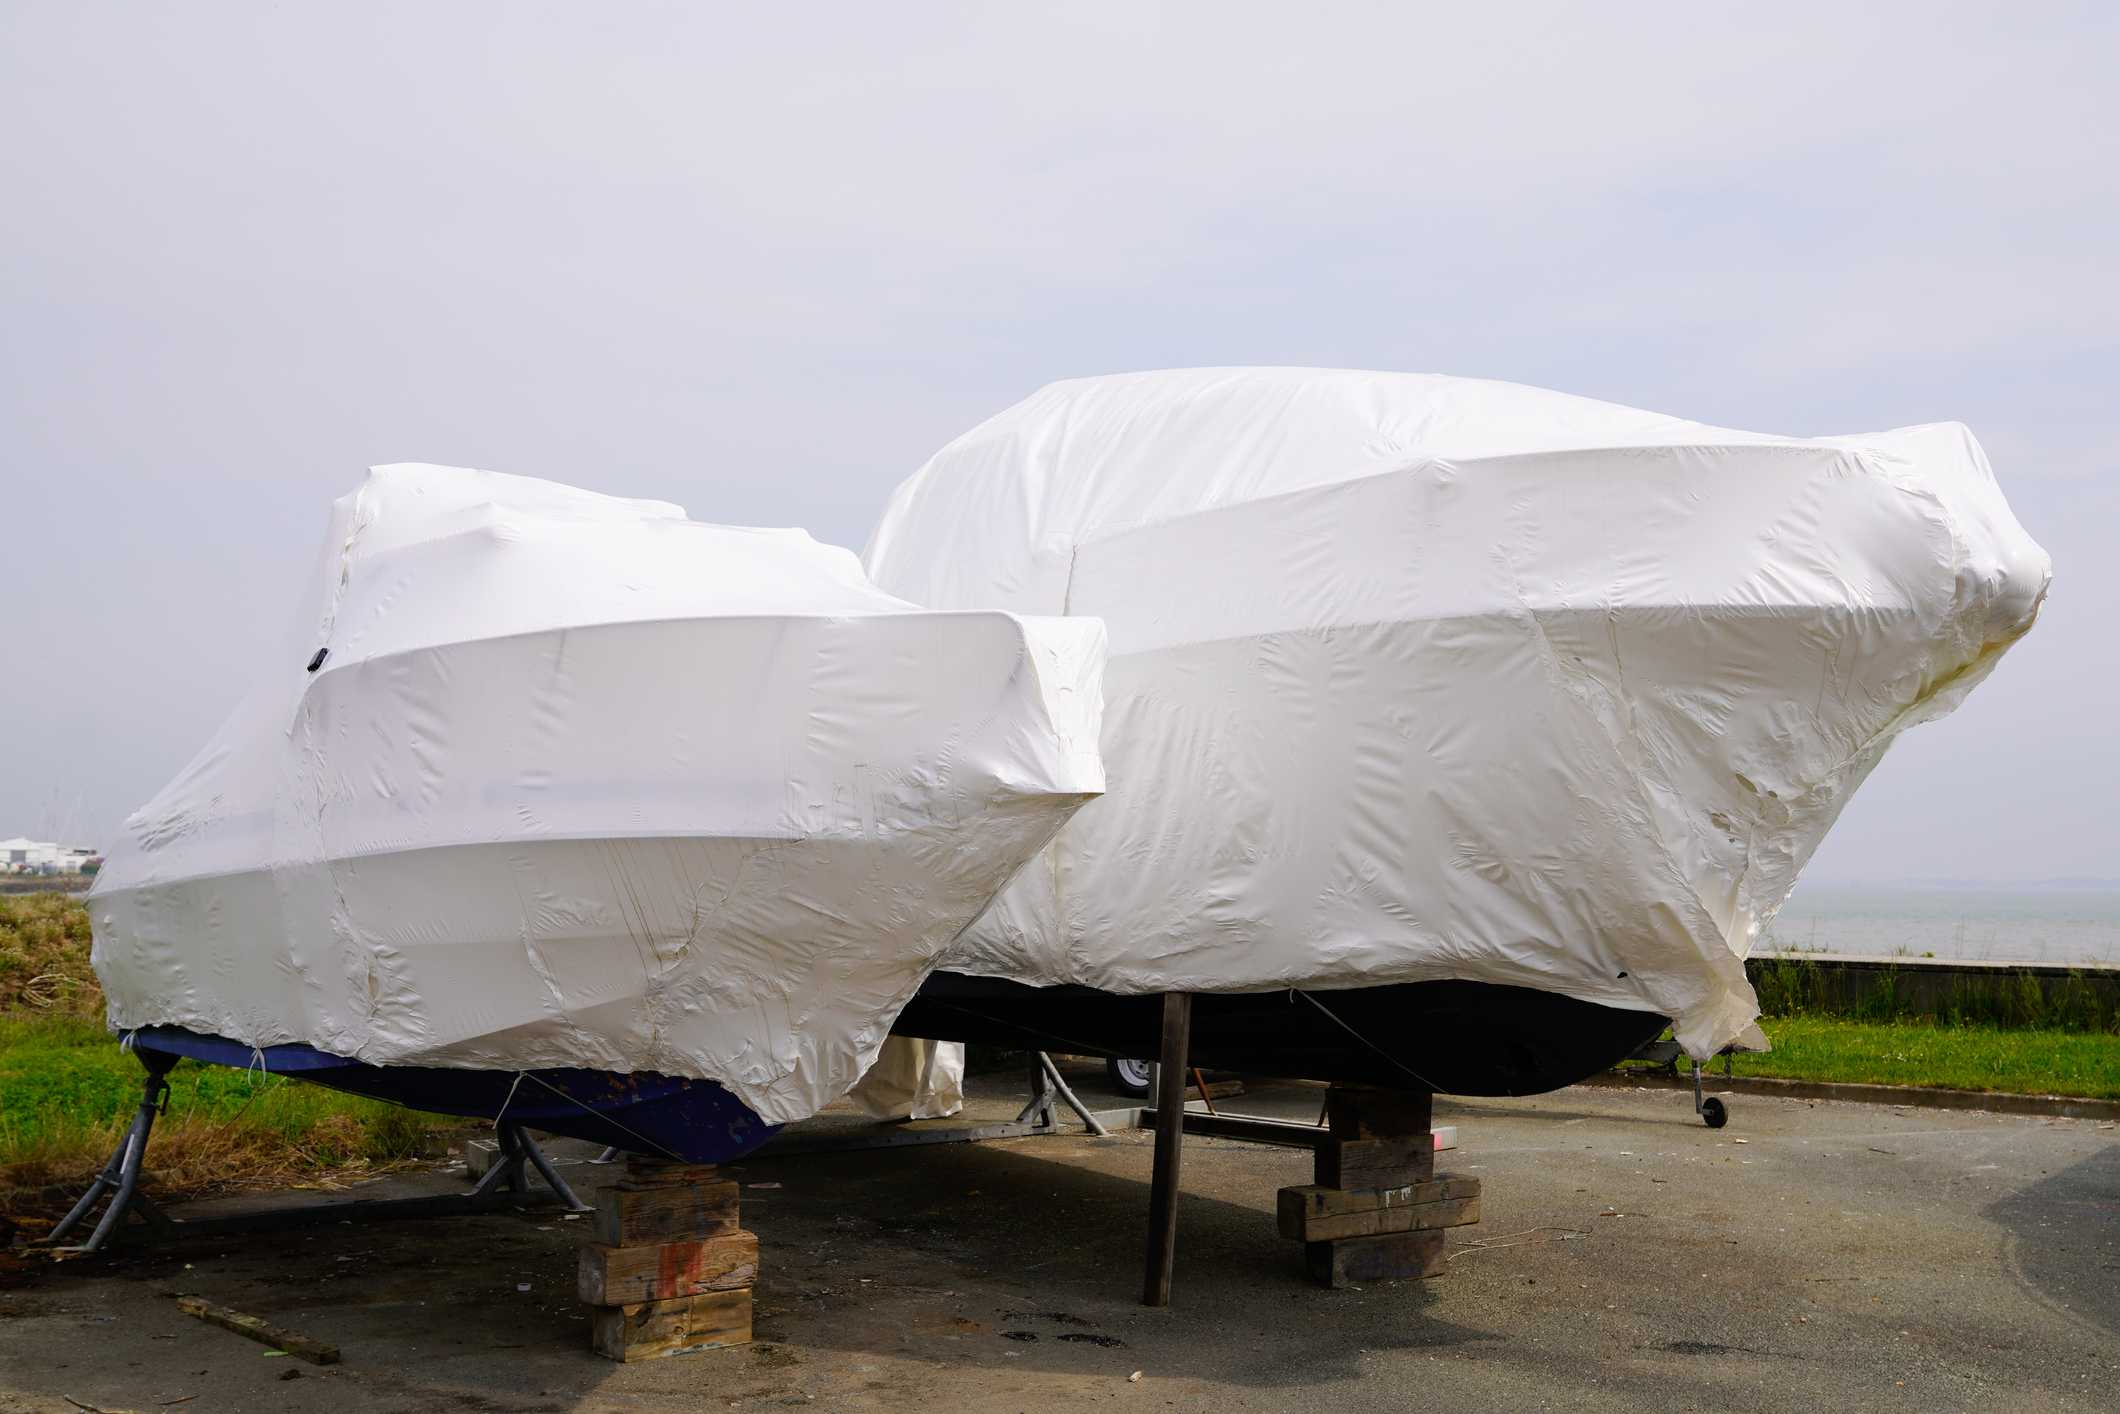 Power Boat Parked Water Protected By Plastic Film For Wintering New Boats In Cover Casing Shrink Wrap On Sailboat Stored For Winter